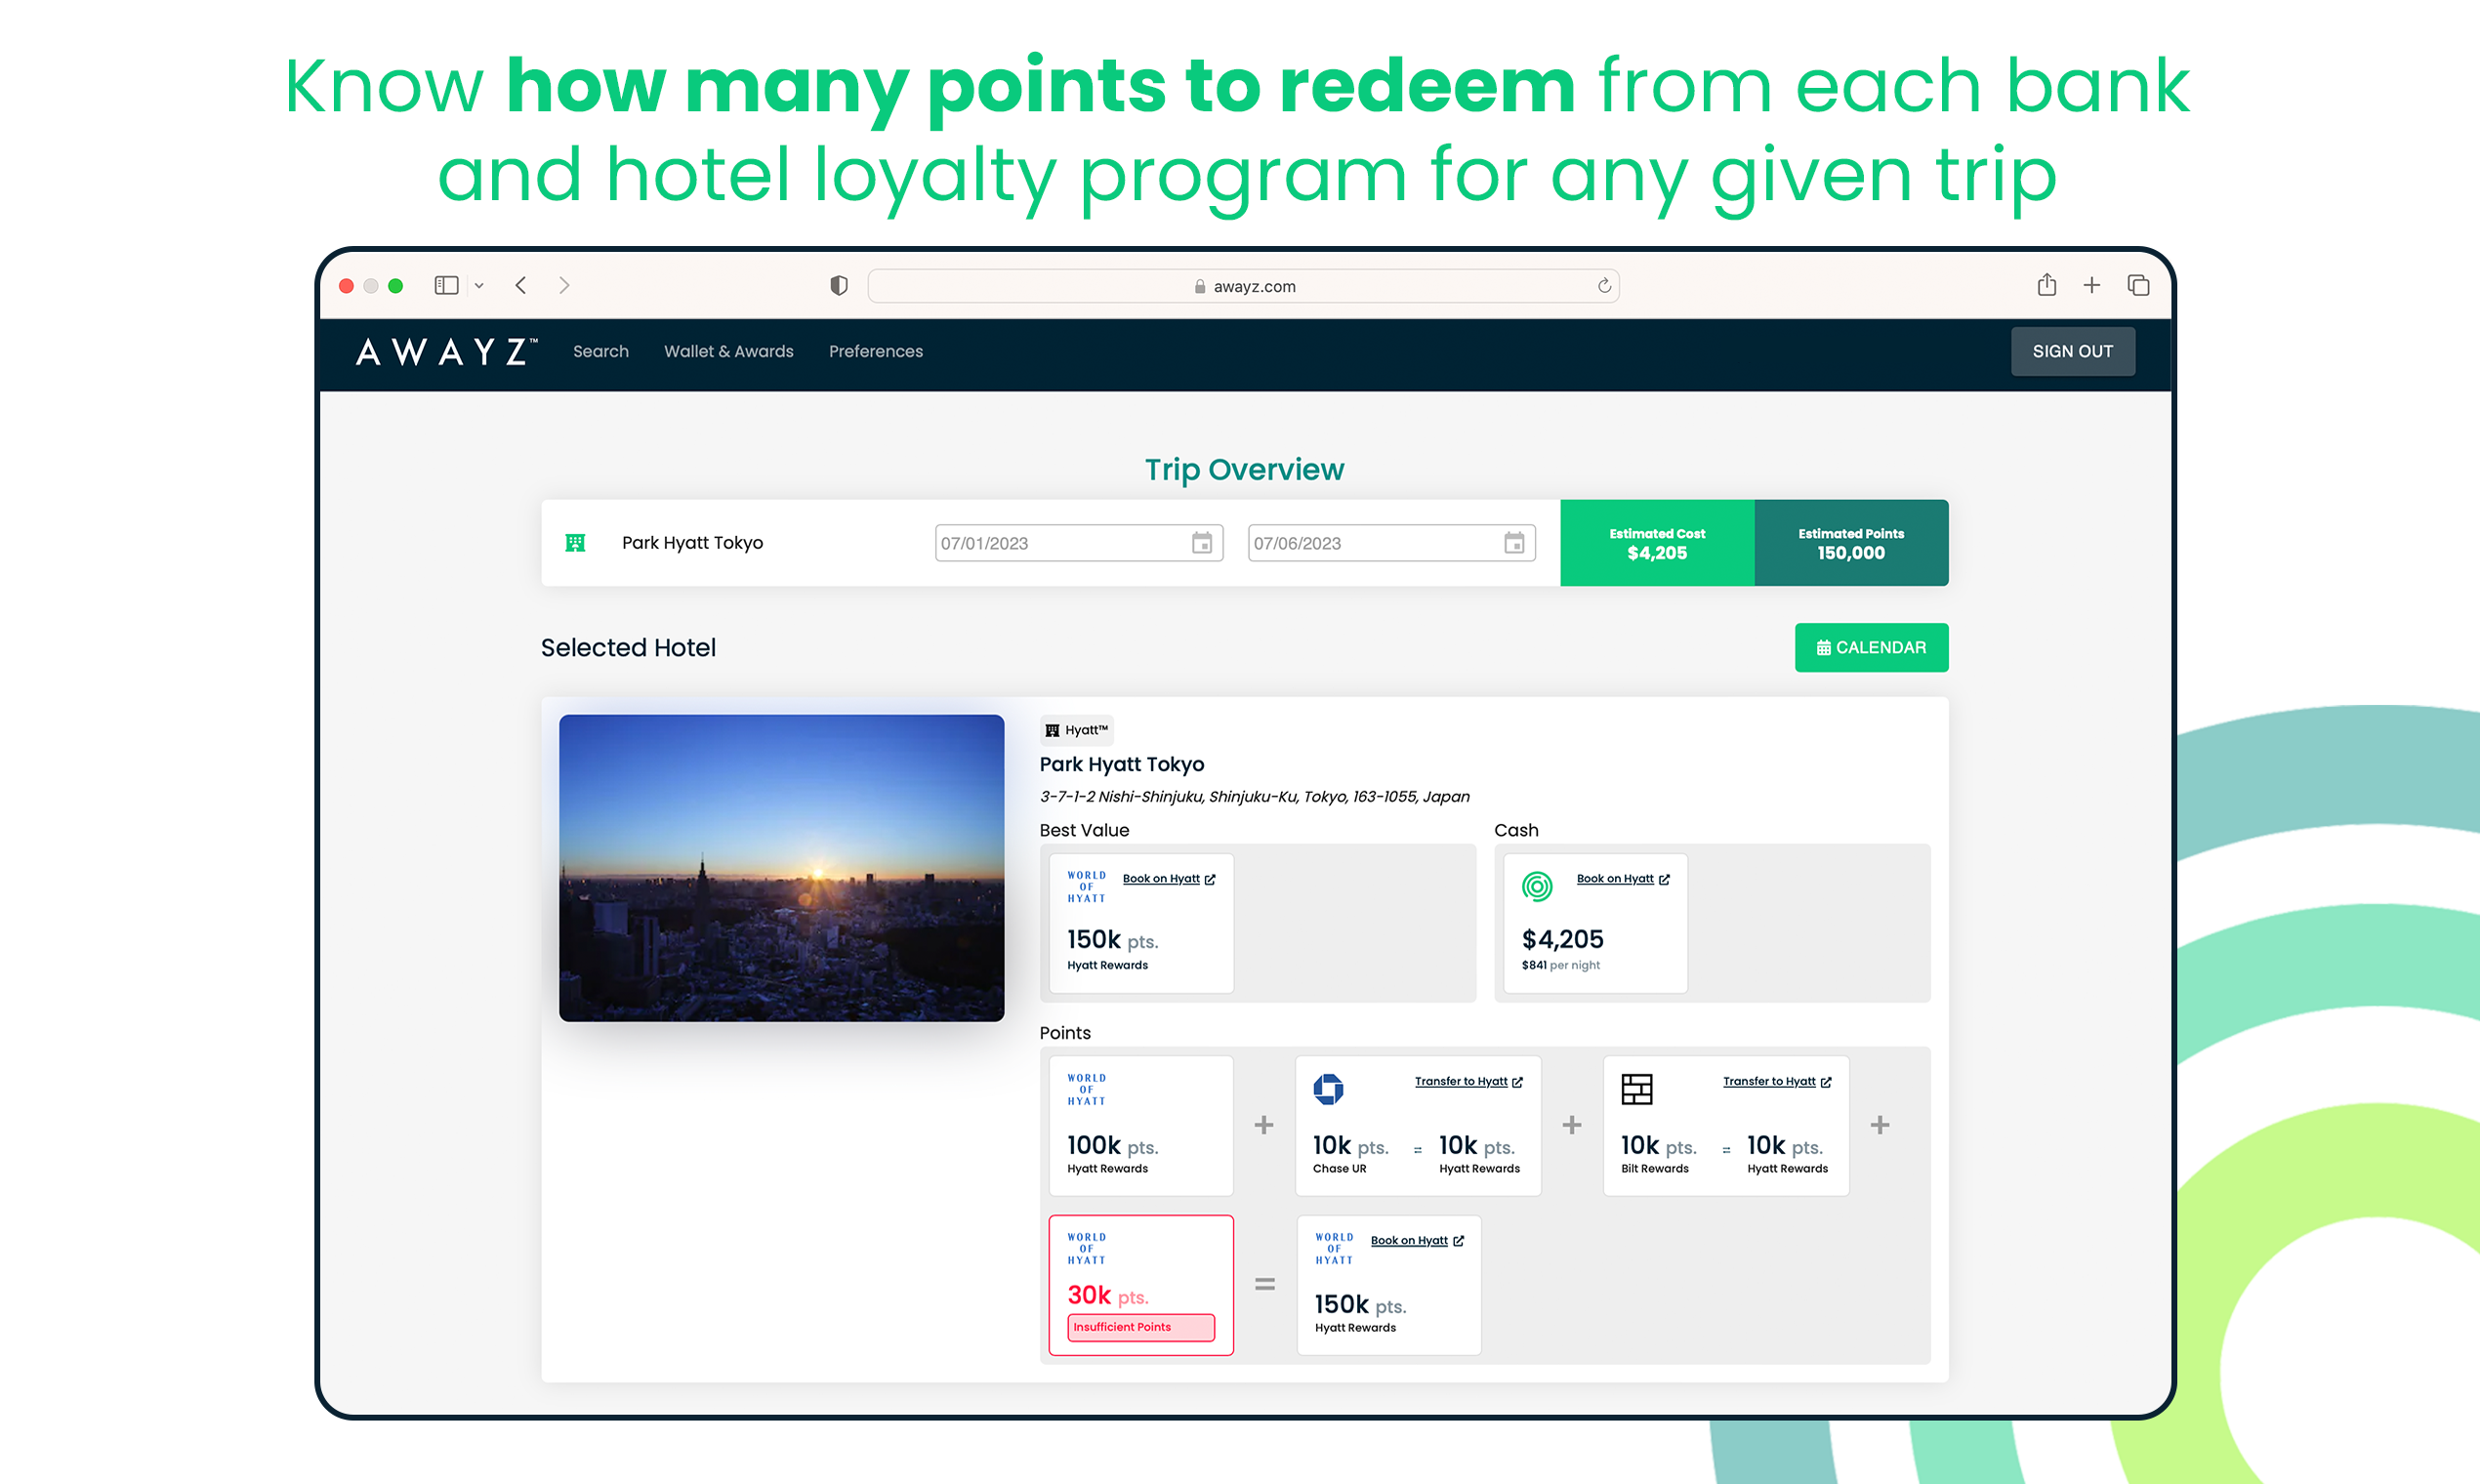 With Awayz's pricing breakdown feature, users know how many points to redeem from each hotel and loyalty program for any given trip.